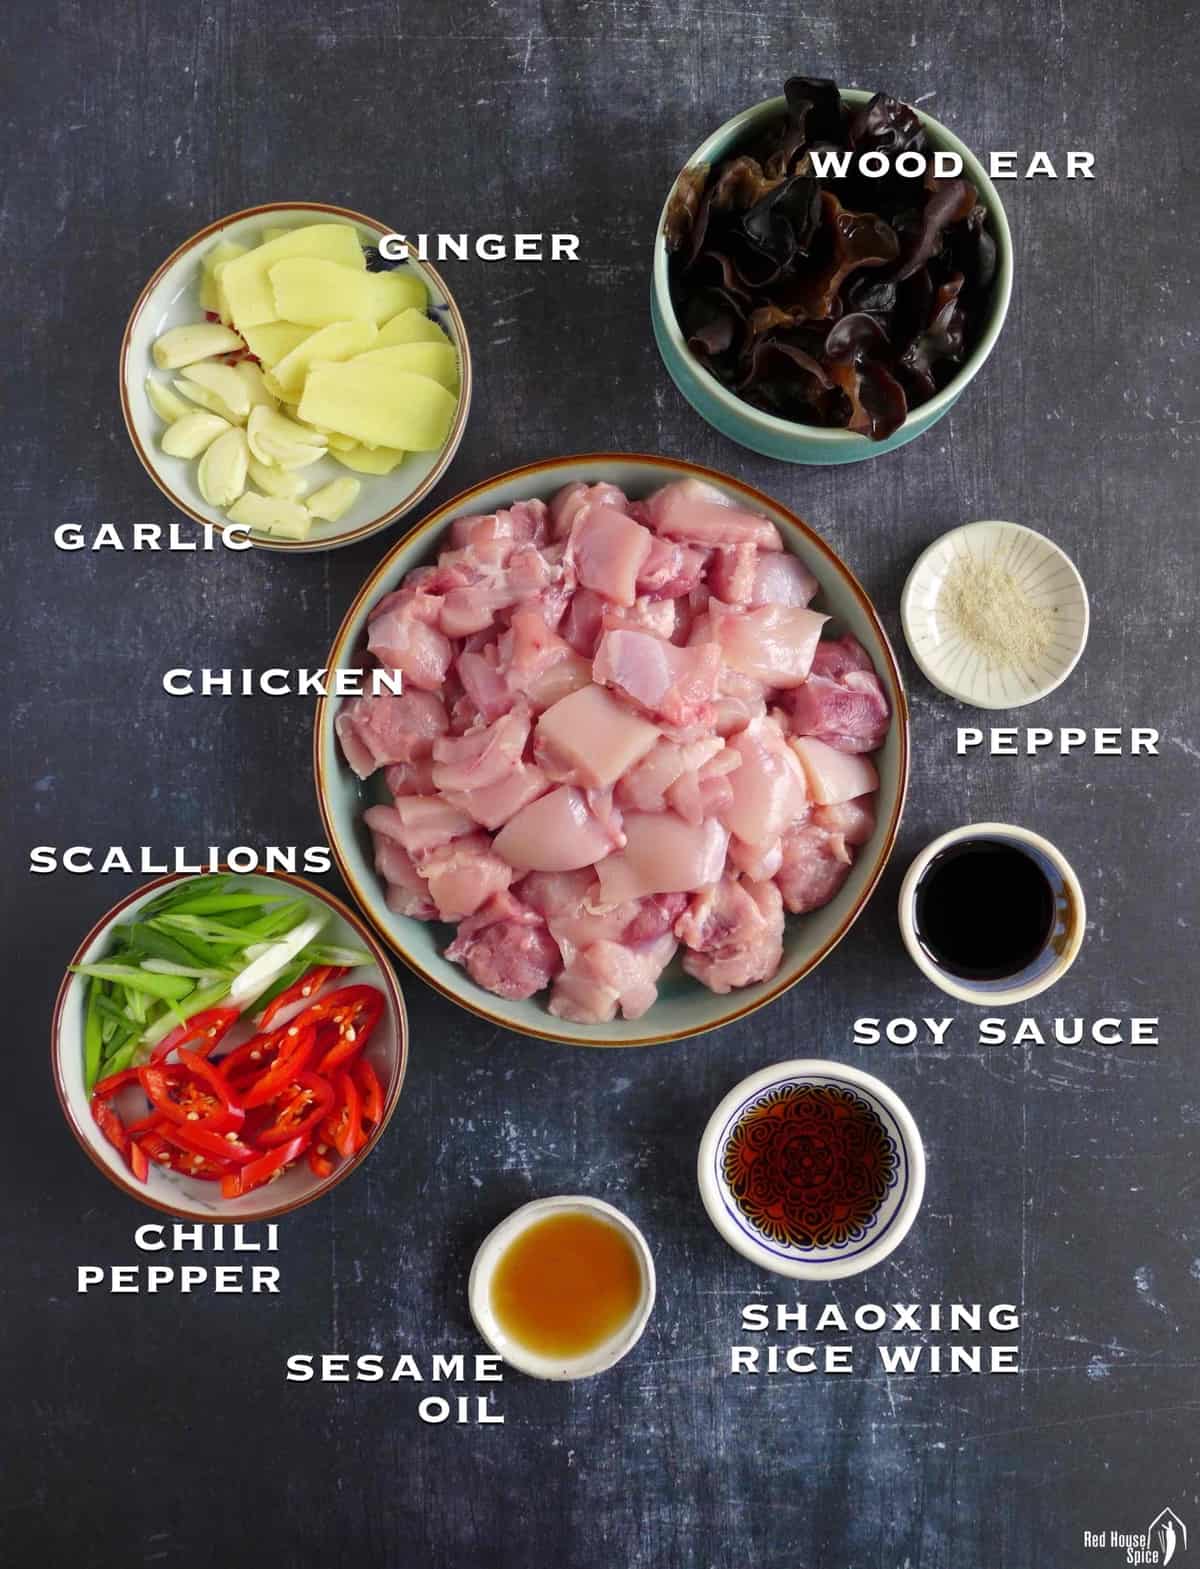 Raw ingredients for cooking ginger chicken